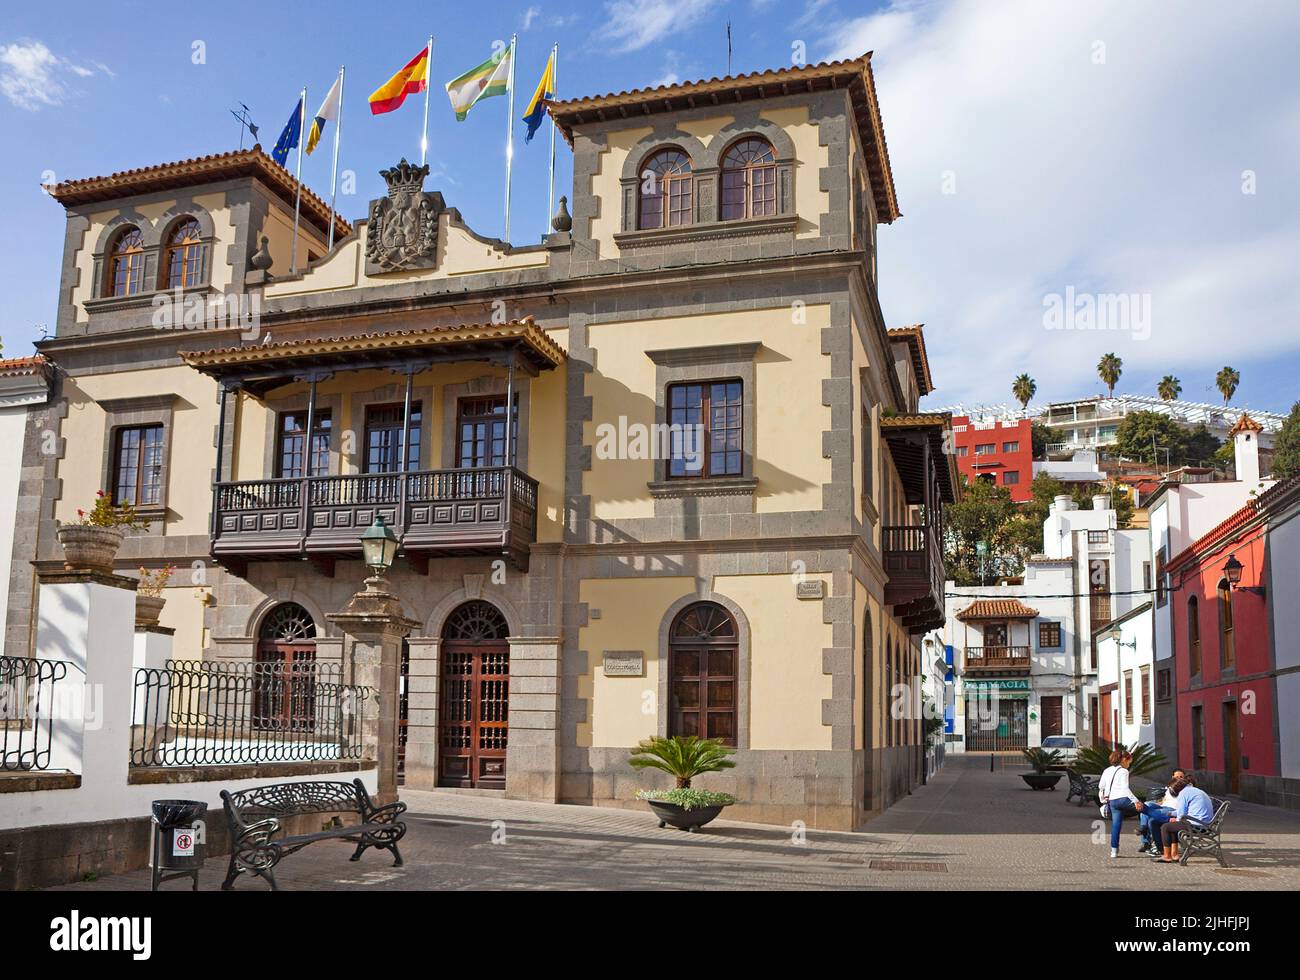 Town hall with traditional wooden balconies, Teror, Grand Canary, Canary islands, Spain, Europe Stock Photo